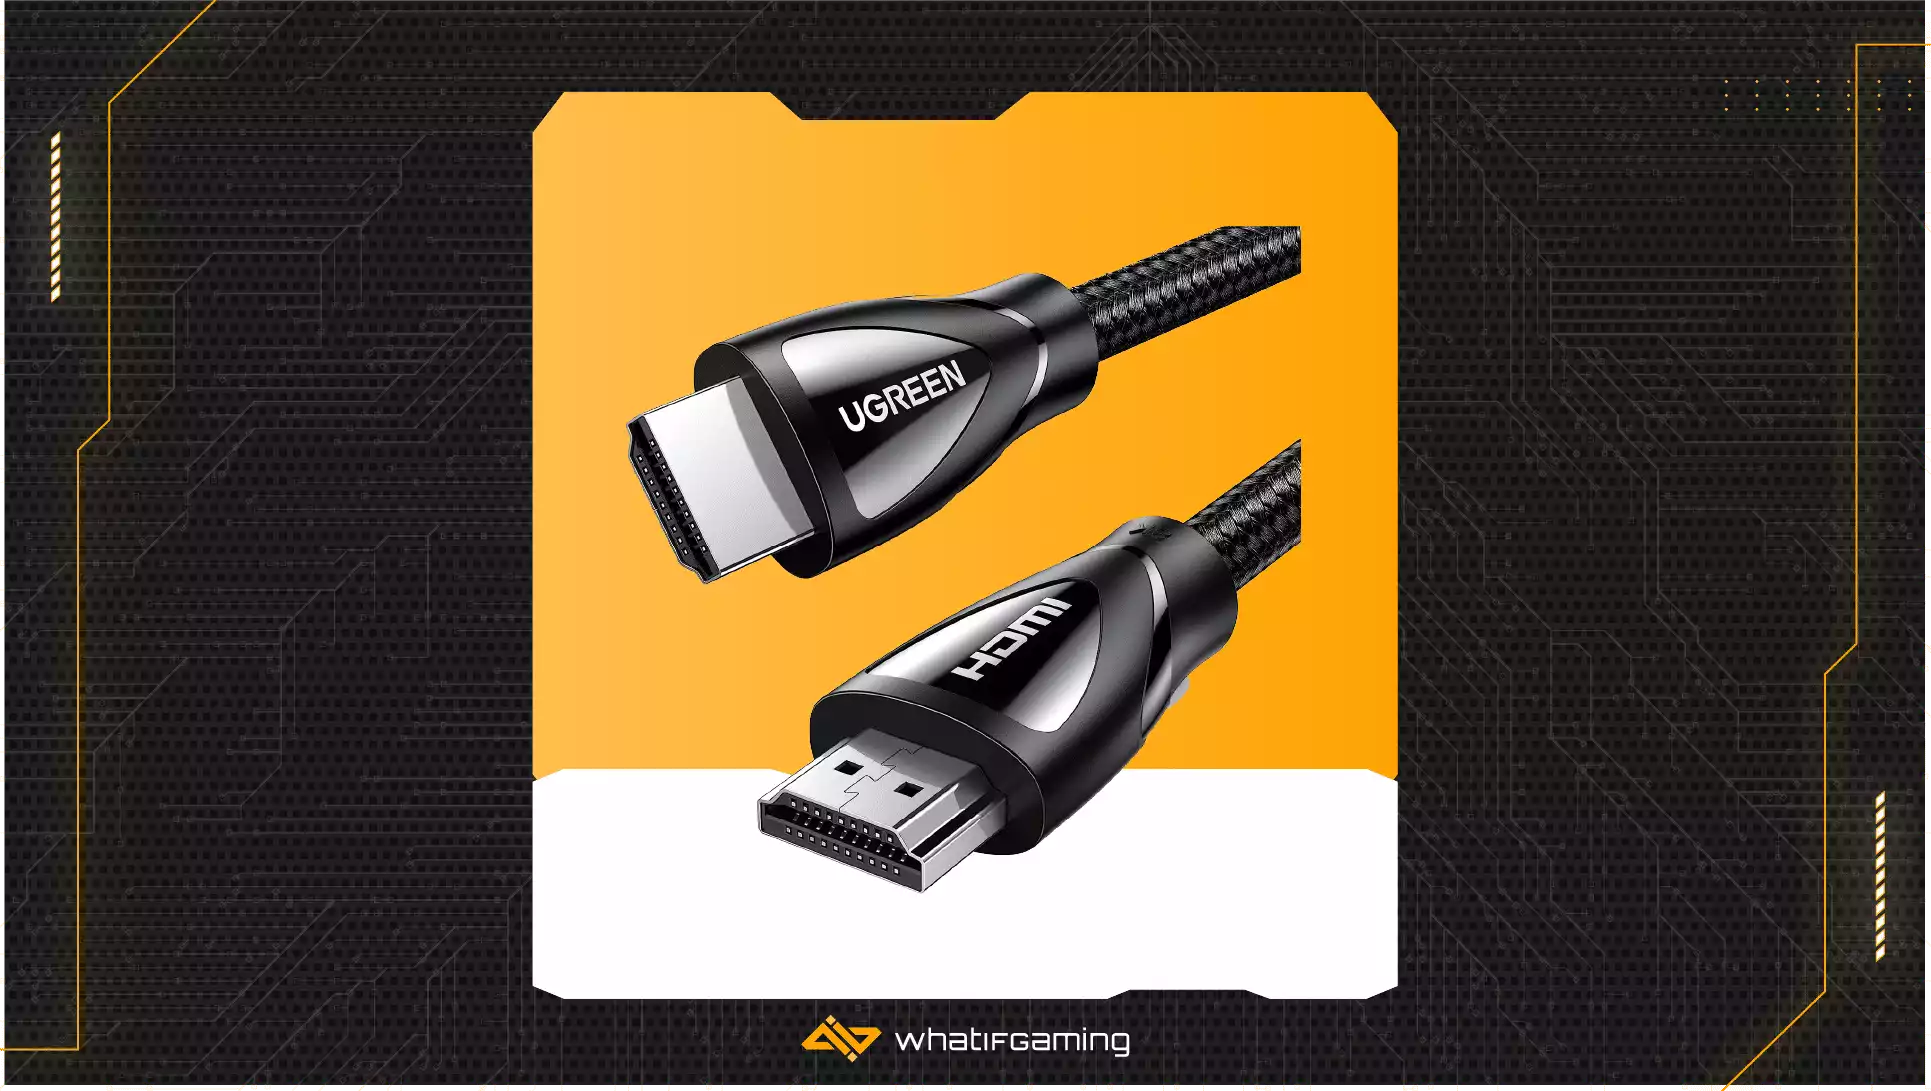 Ugreen 8K HDMI Cable 2.1